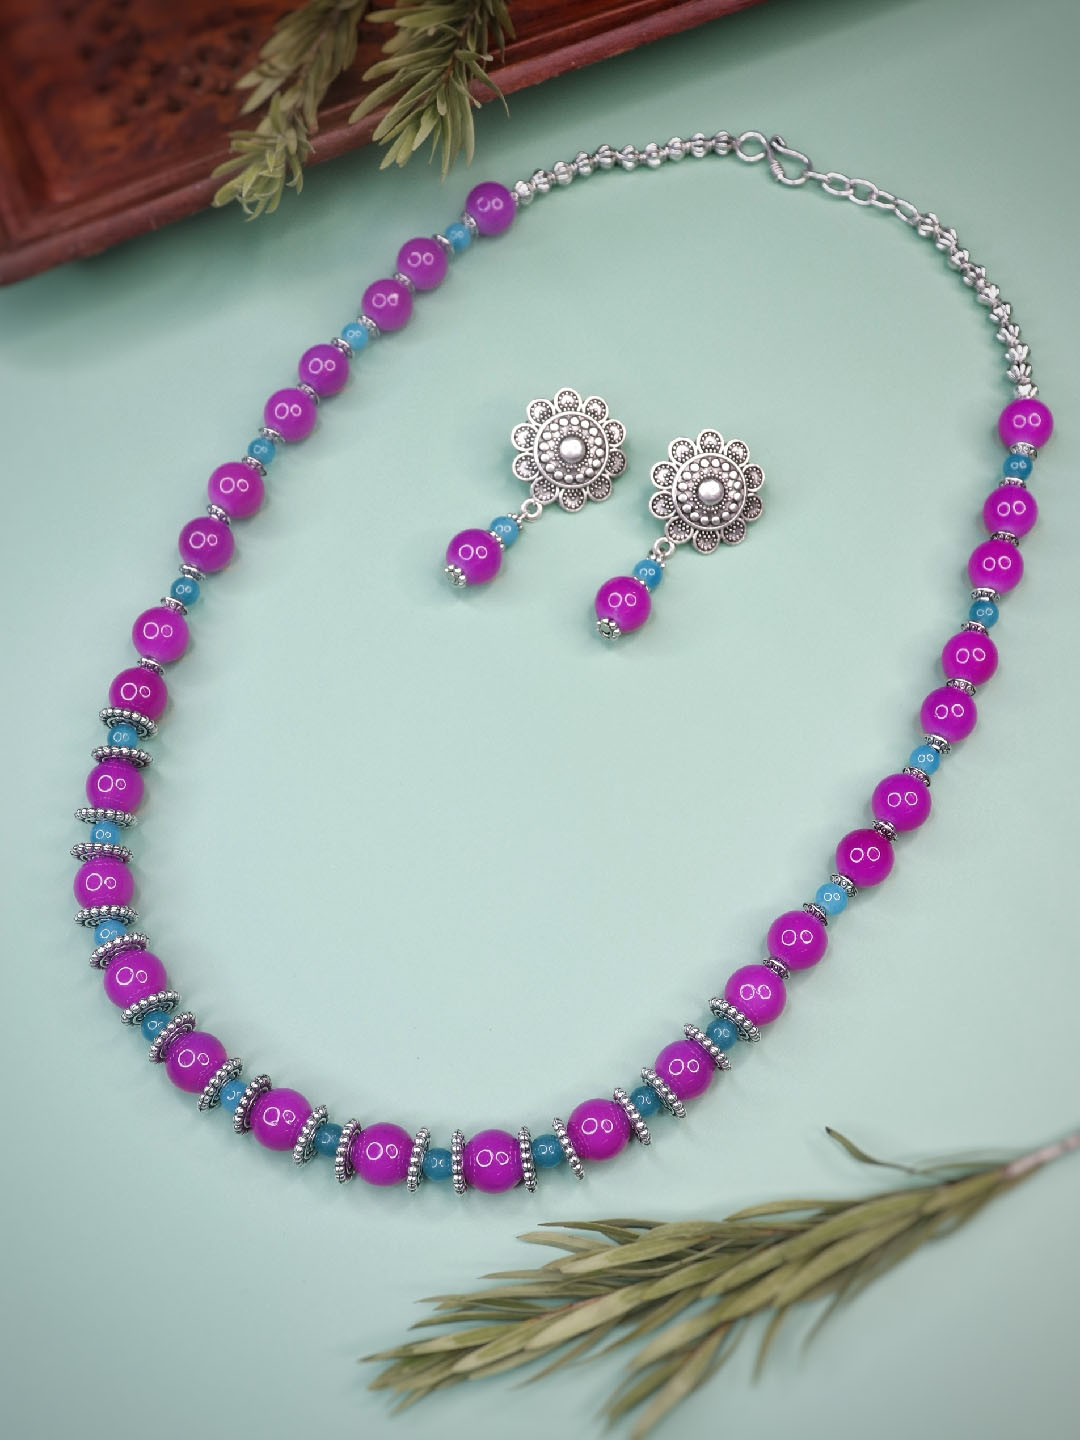 Colorful Bead Necklace - Nest Pretty Things